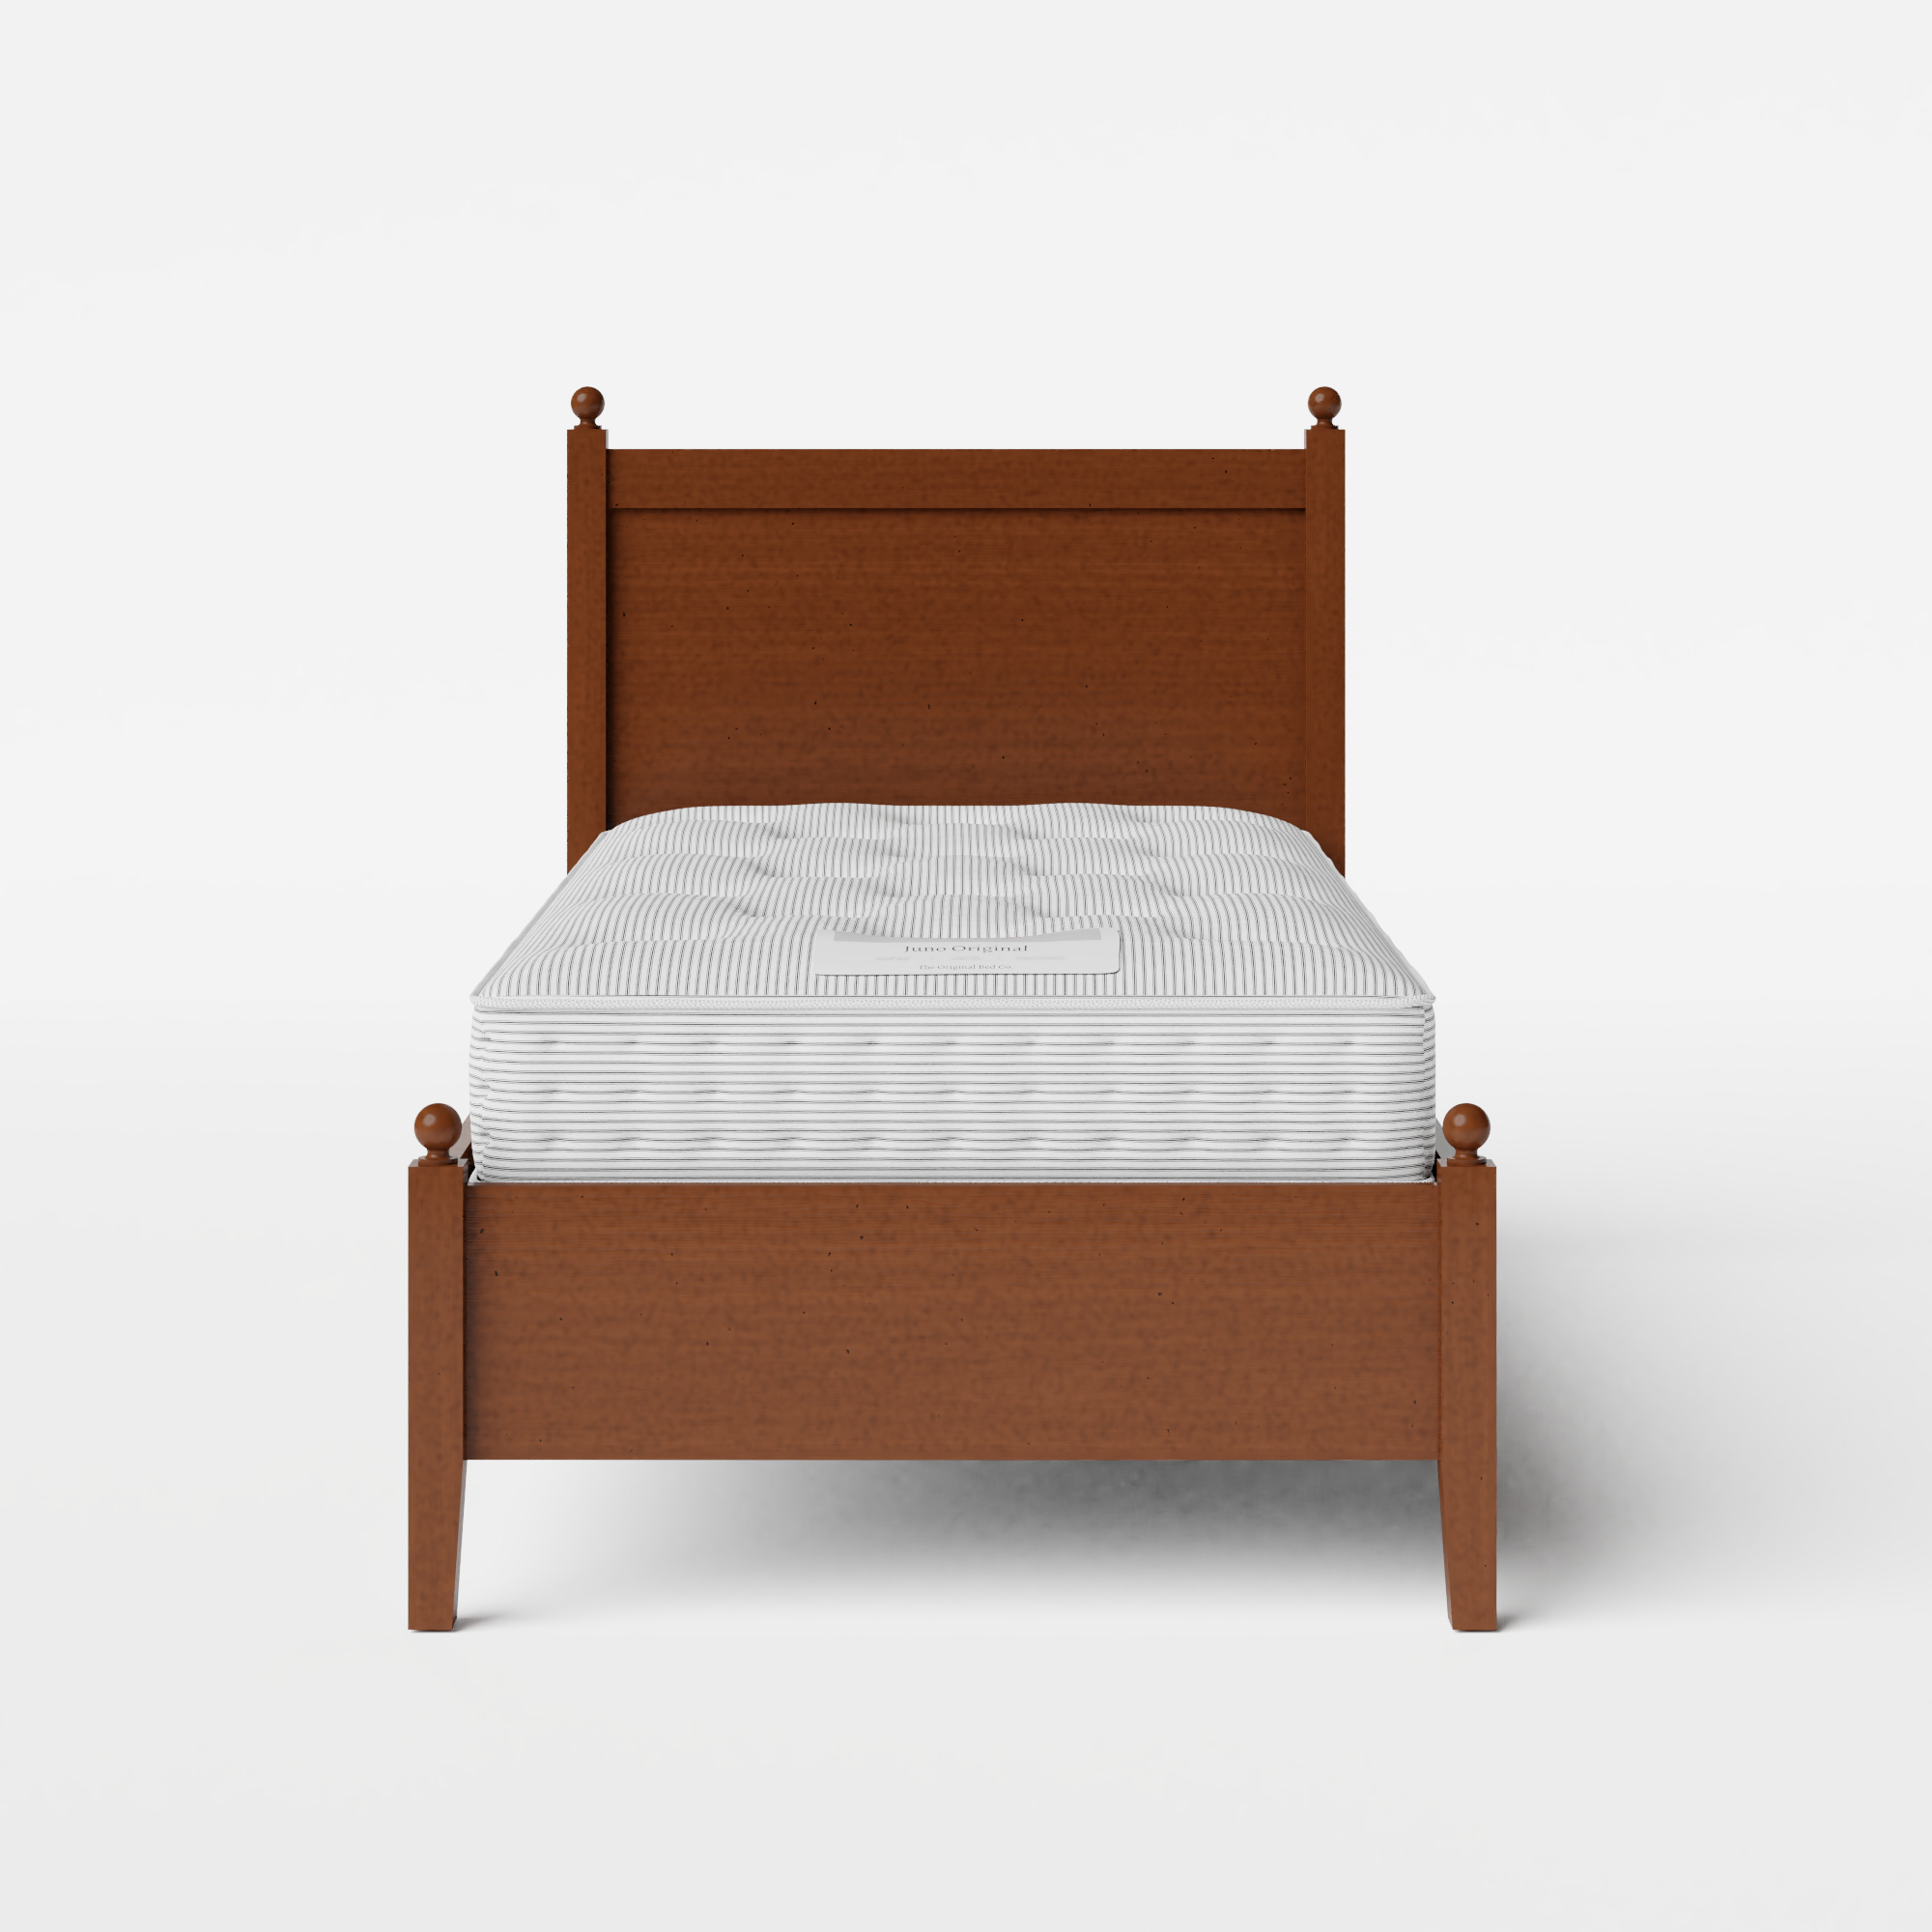 Marbella Low Footend single wood bed in dark cherry with Juno mattress